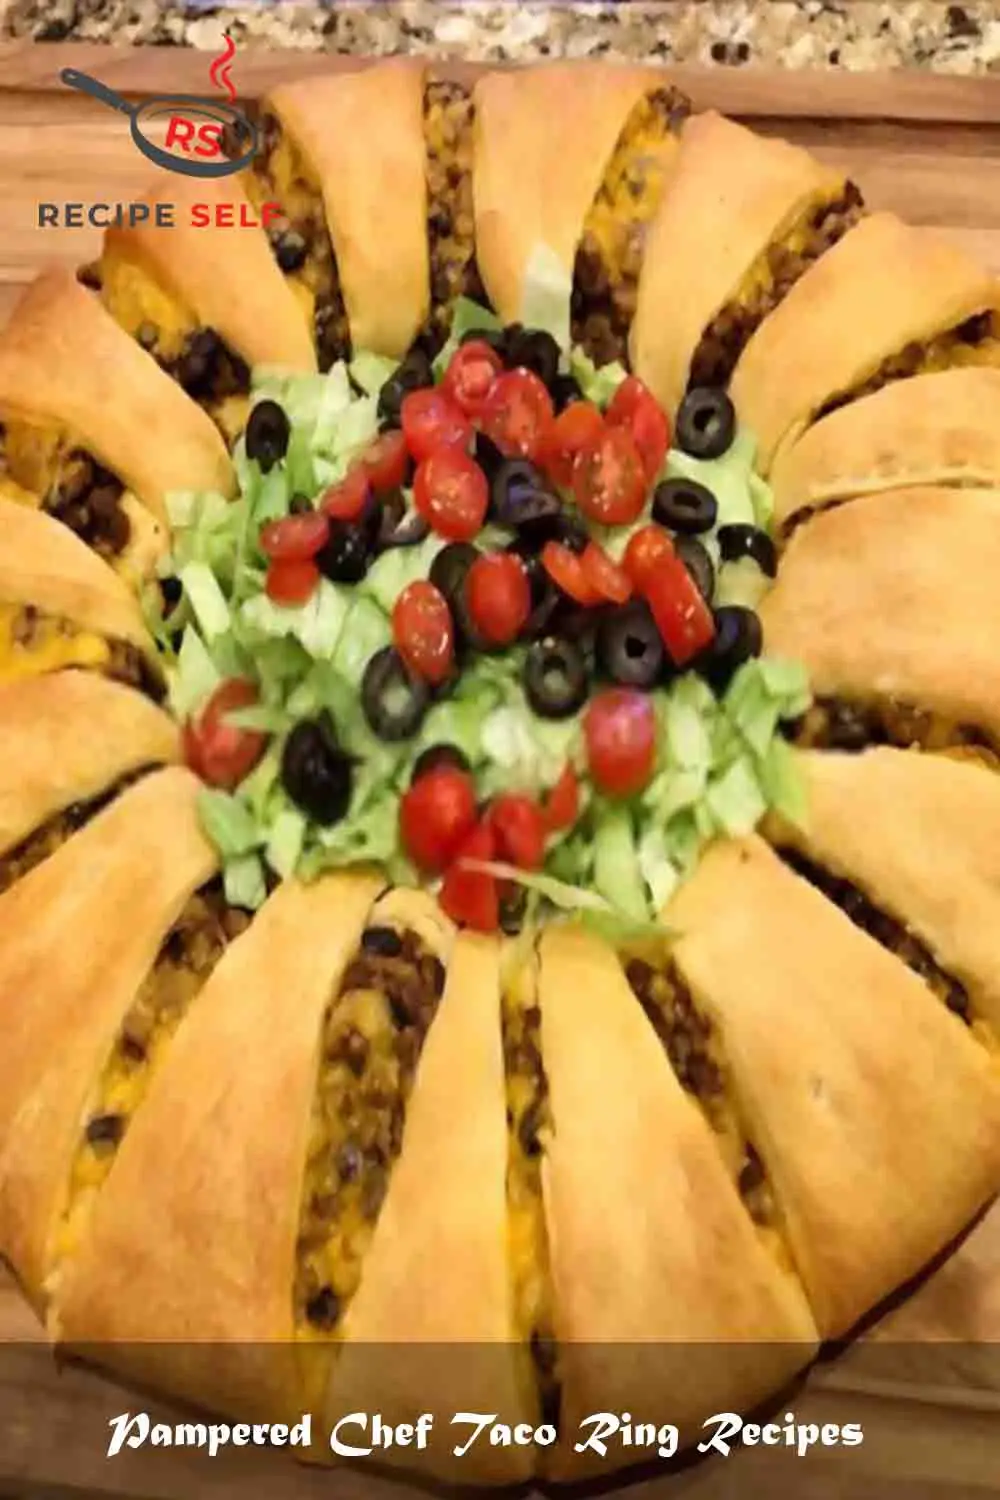 Pampered Chef Taco Ring Recipes